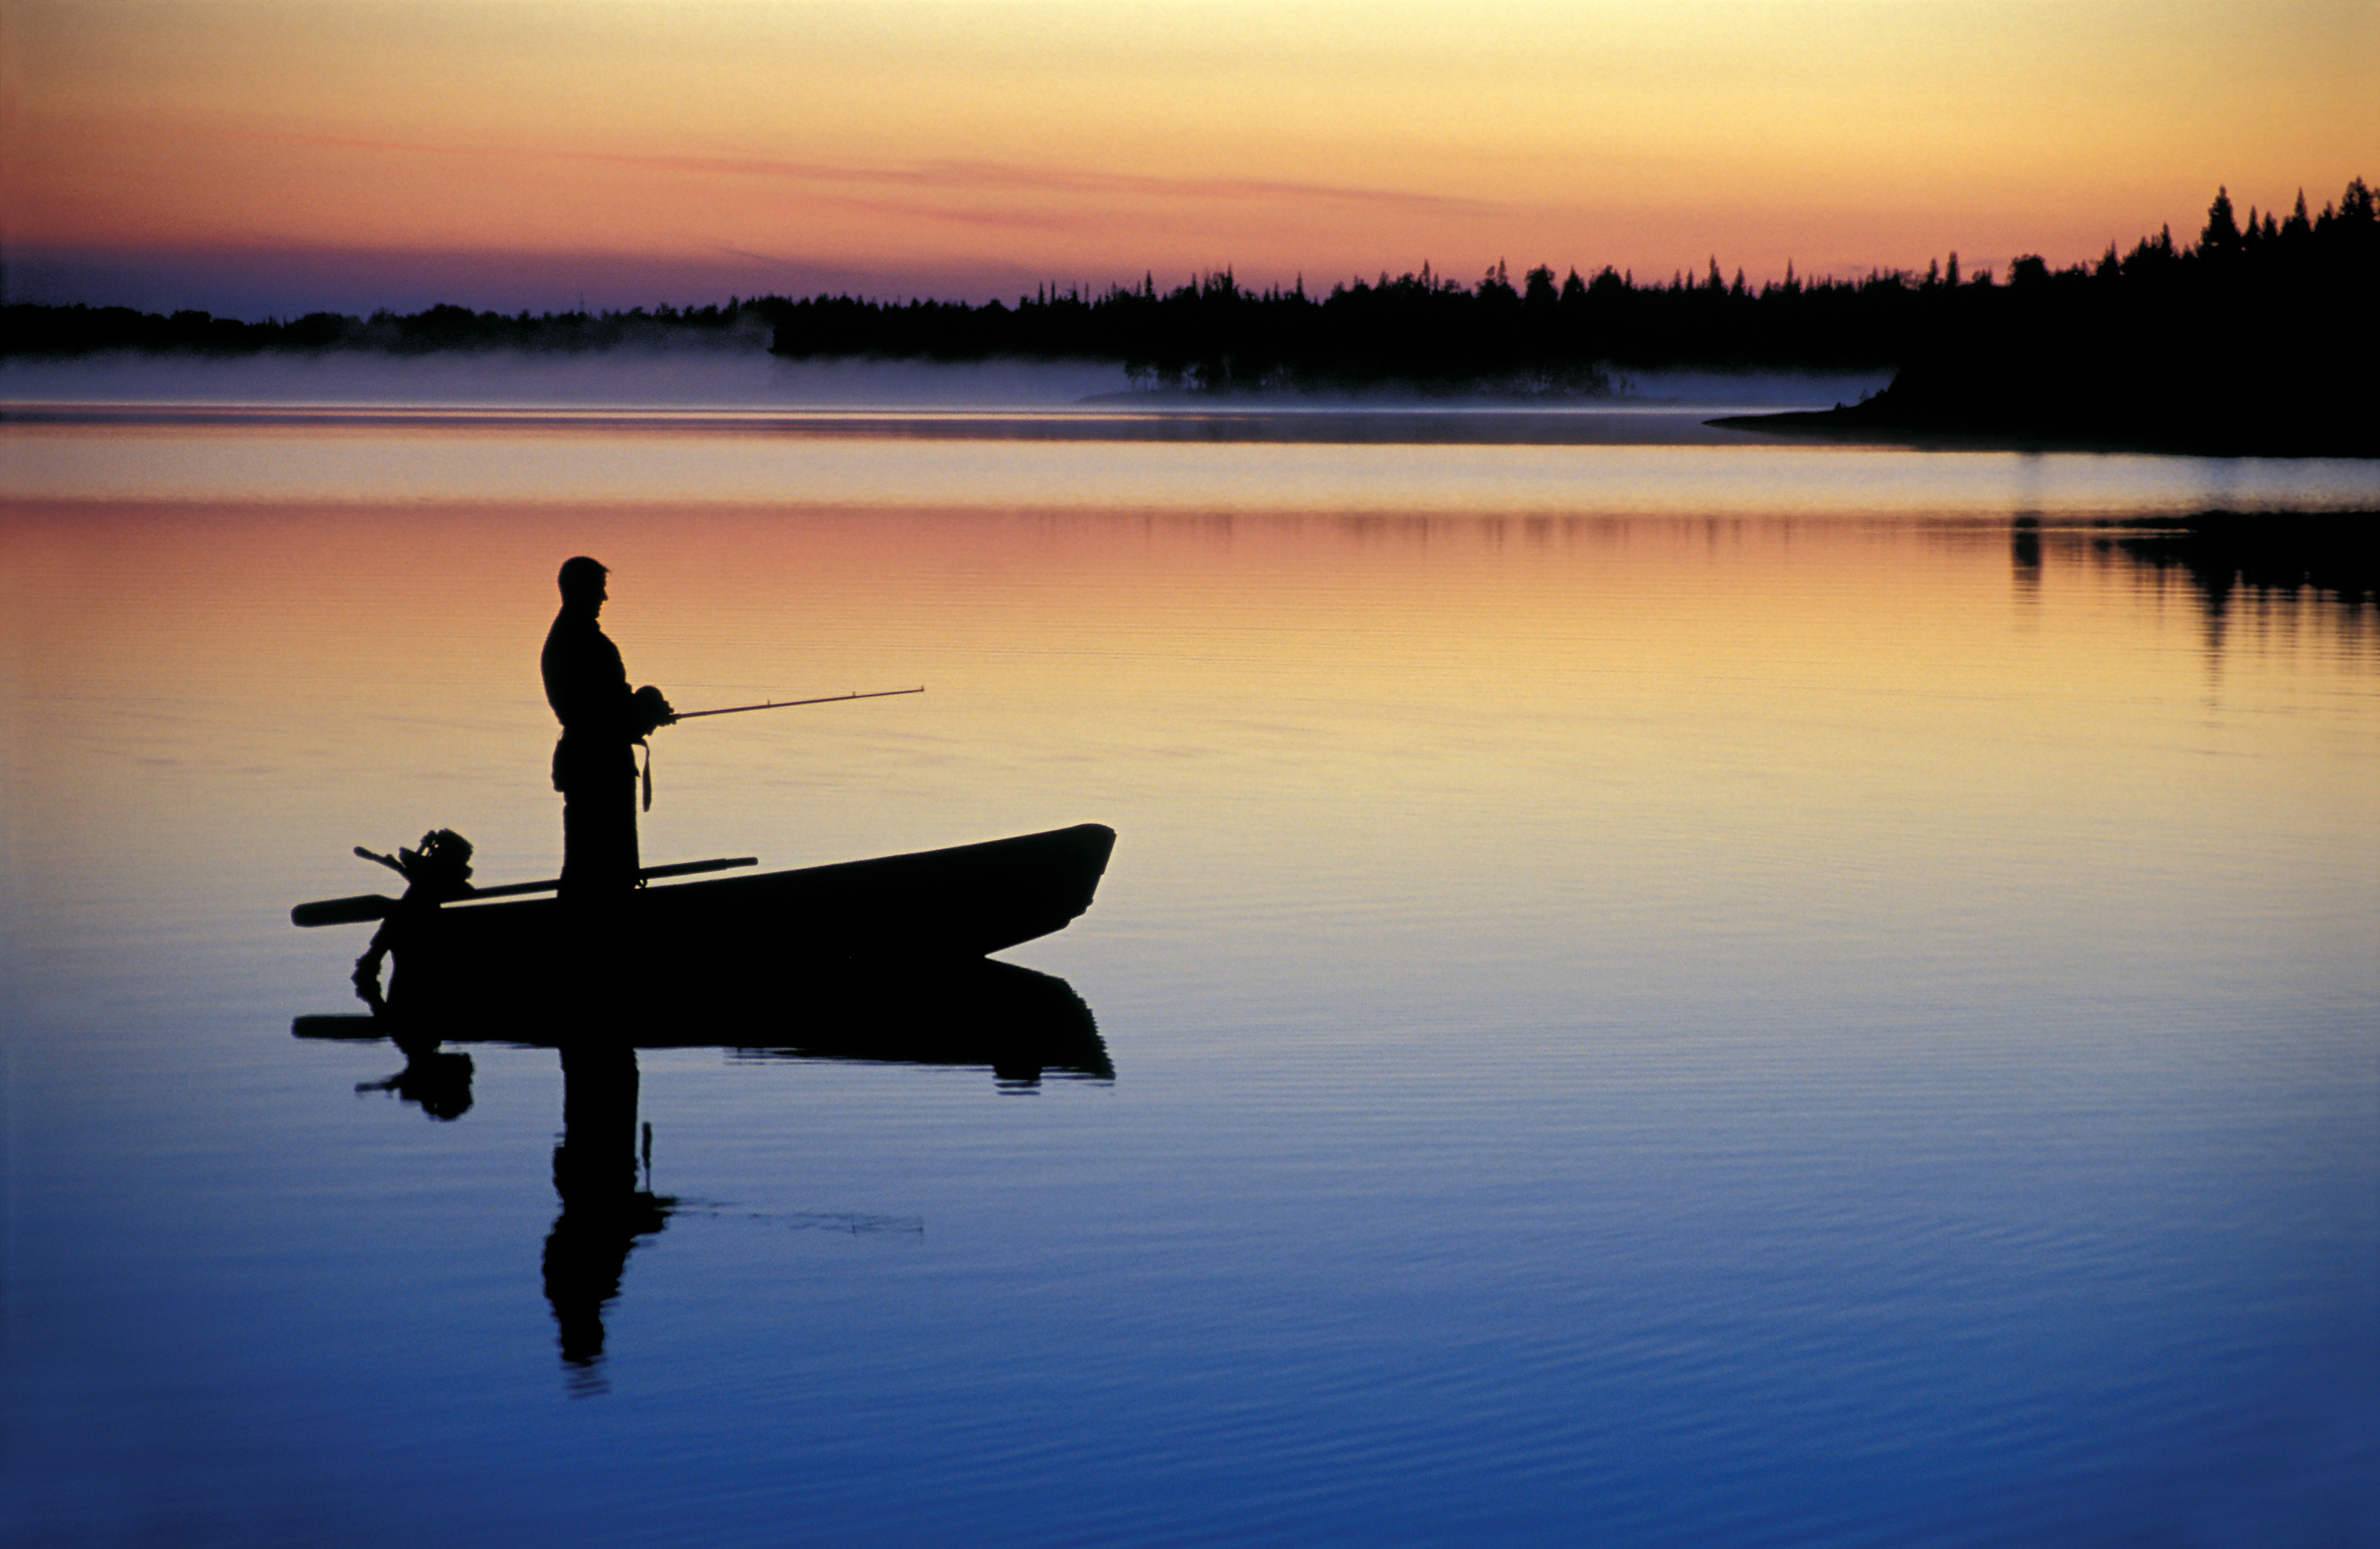 A person fishing from a boat in the distance, bass fishing concept. 